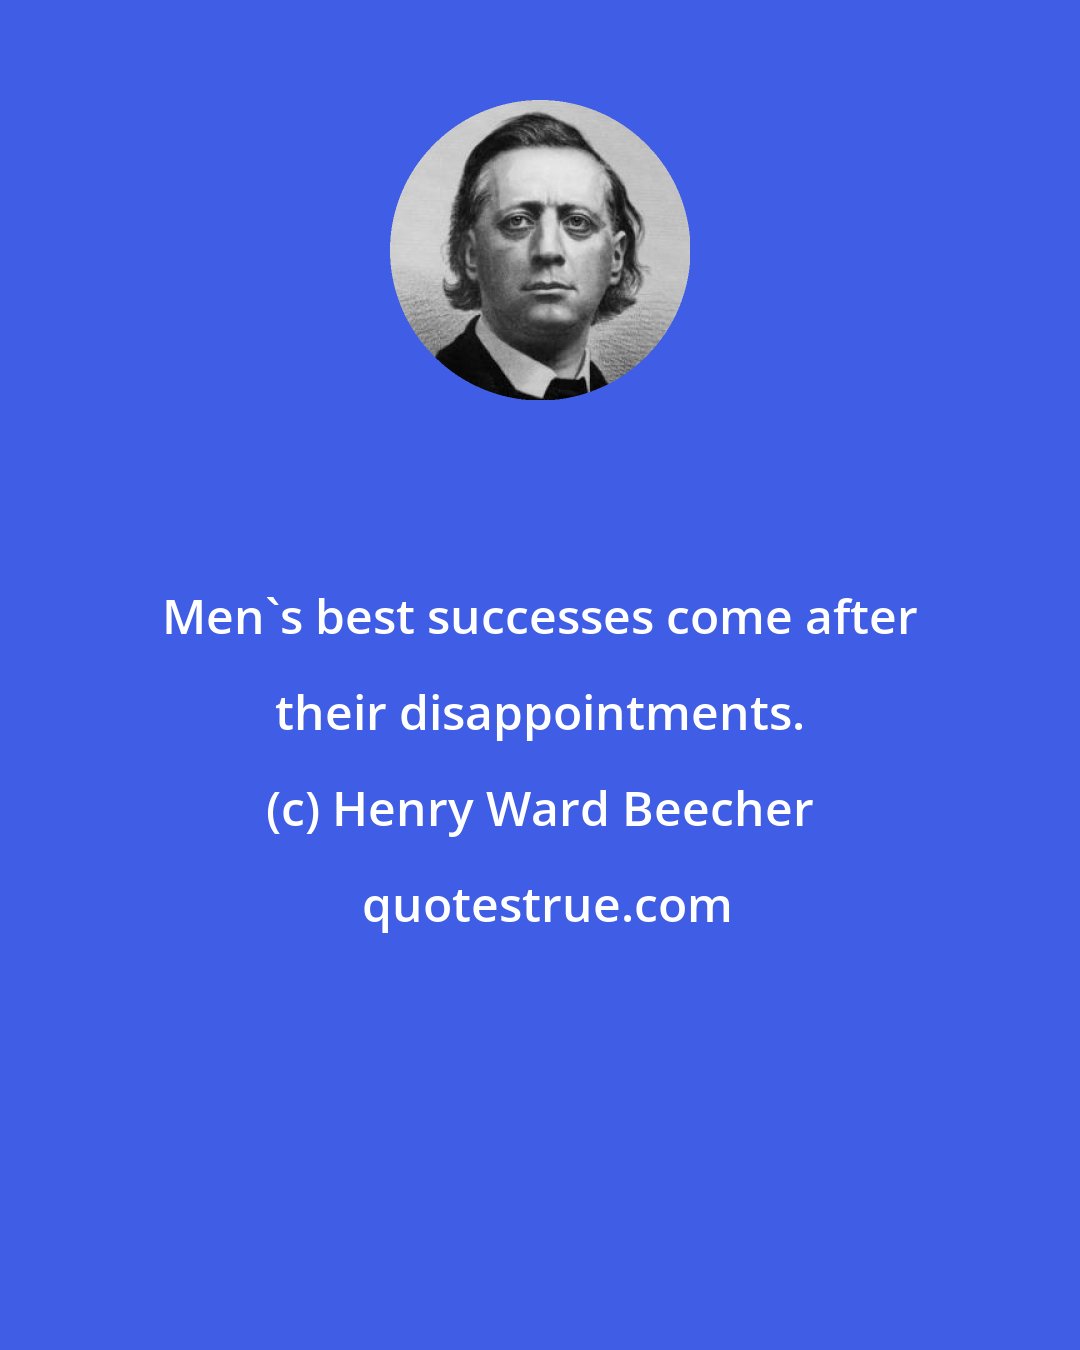 Henry Ward Beecher: Men's best successes come after their disappointments.